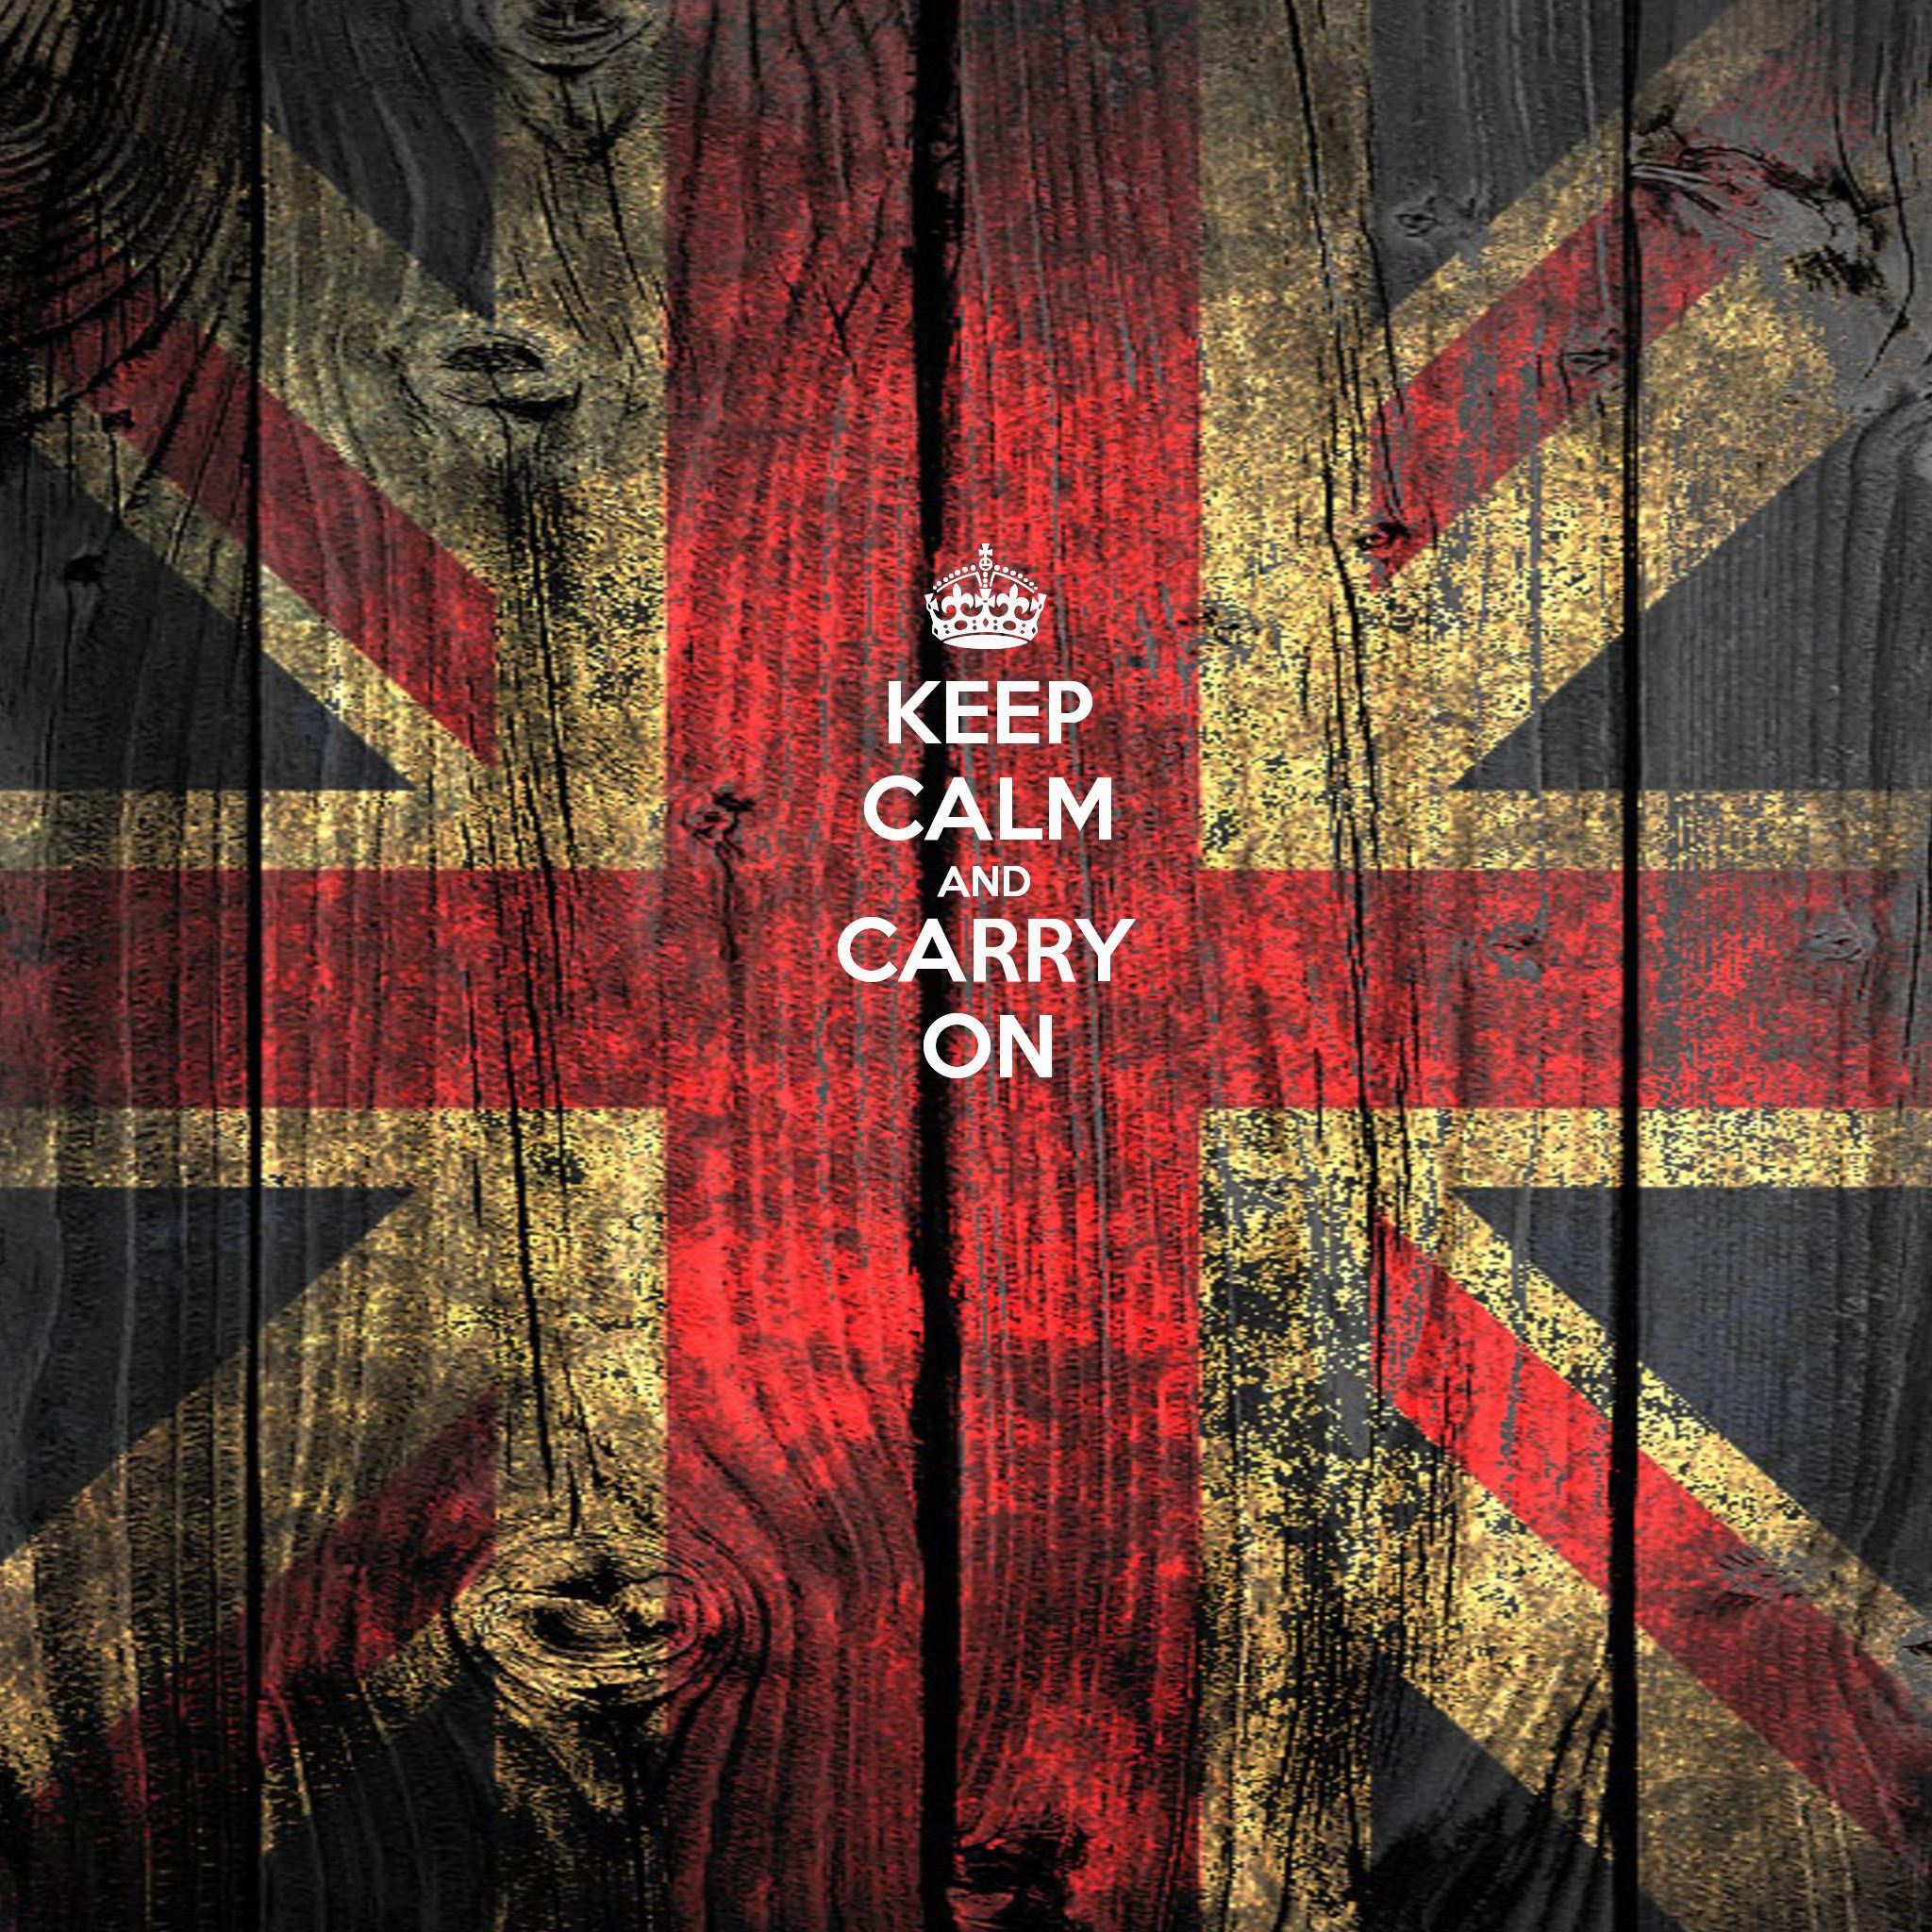 Keep Calm And Carry On Quotes iPad Air wallpaper 